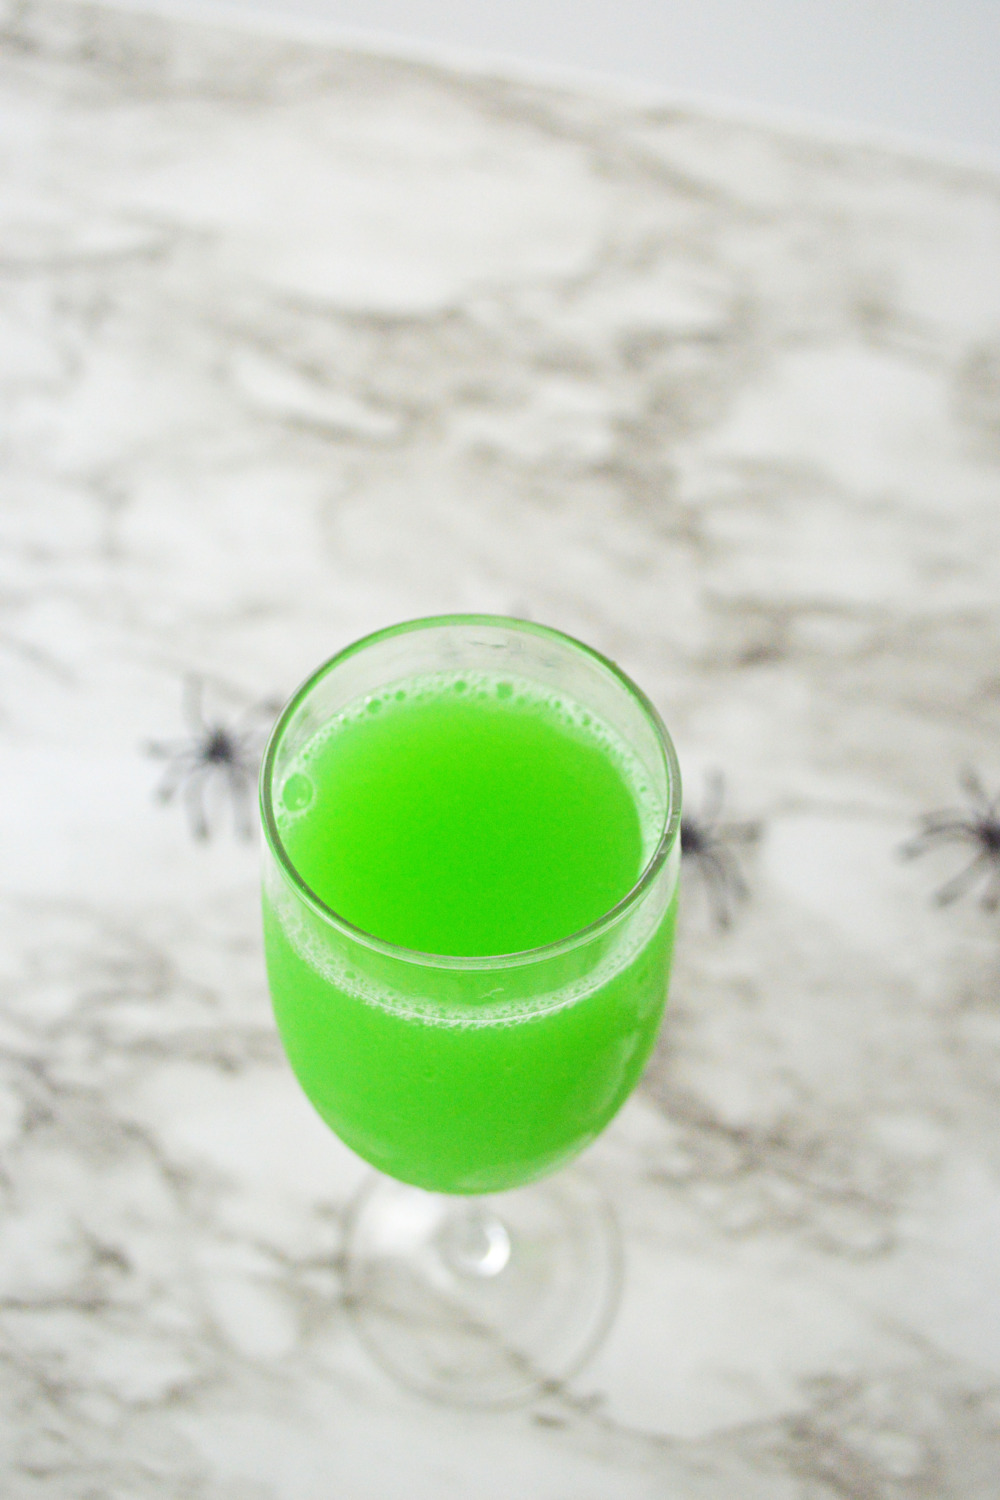 A single glass of orange juice, blue curacao and champagne sitting on the gray and white marble background with spiders. The orange juice looks green with all the ingredients mixed together for the Halloween Mimosa.